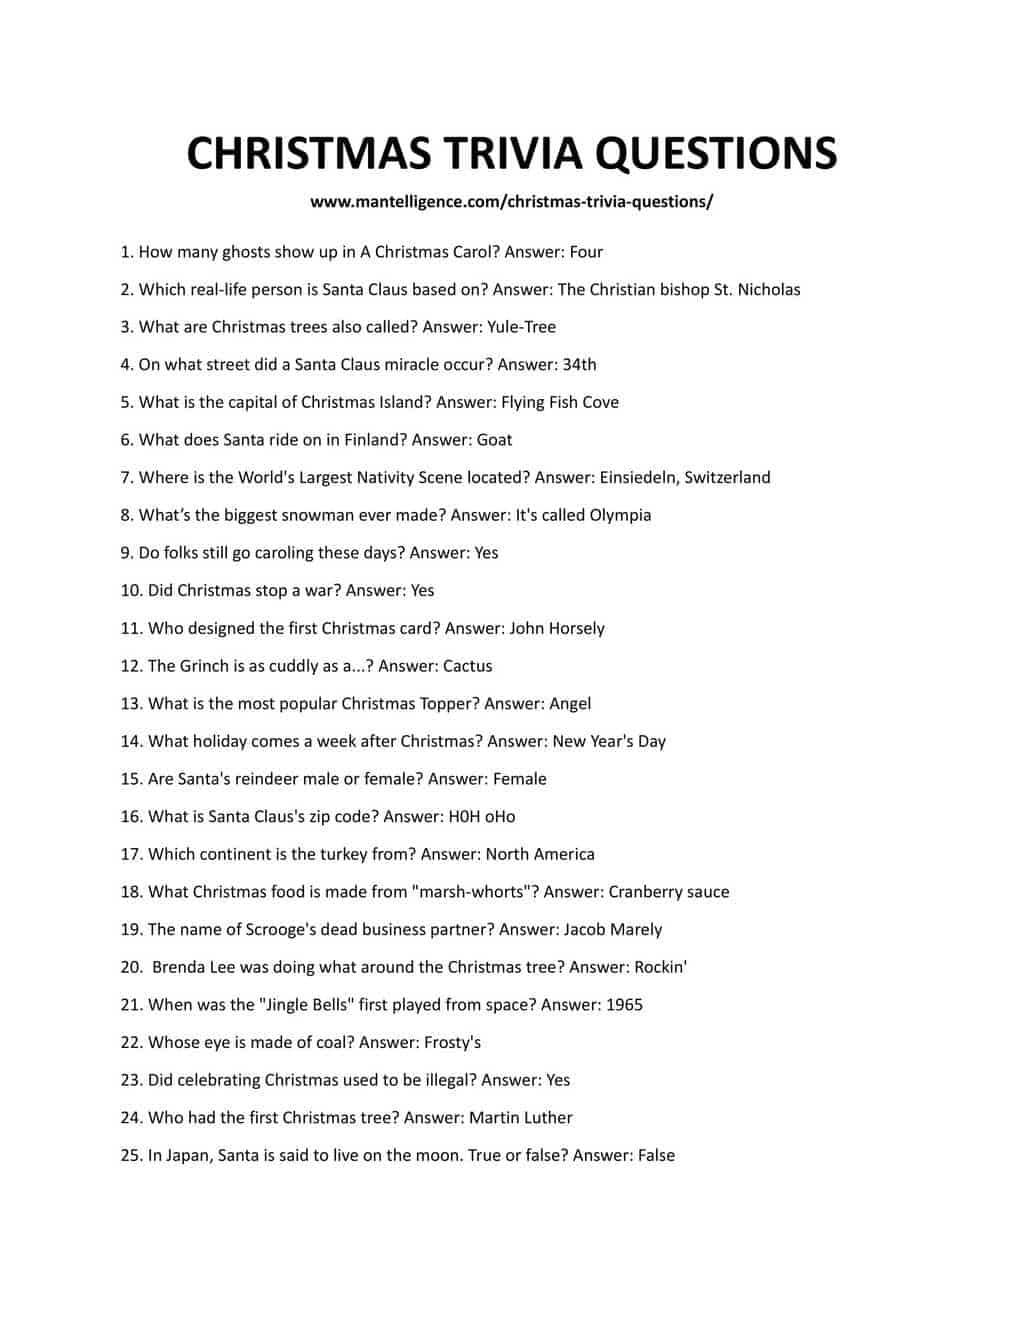 christmas-trivia-for-kids-printable-dec-10-2012-in-a-christmas-story-what-was-the-one-item